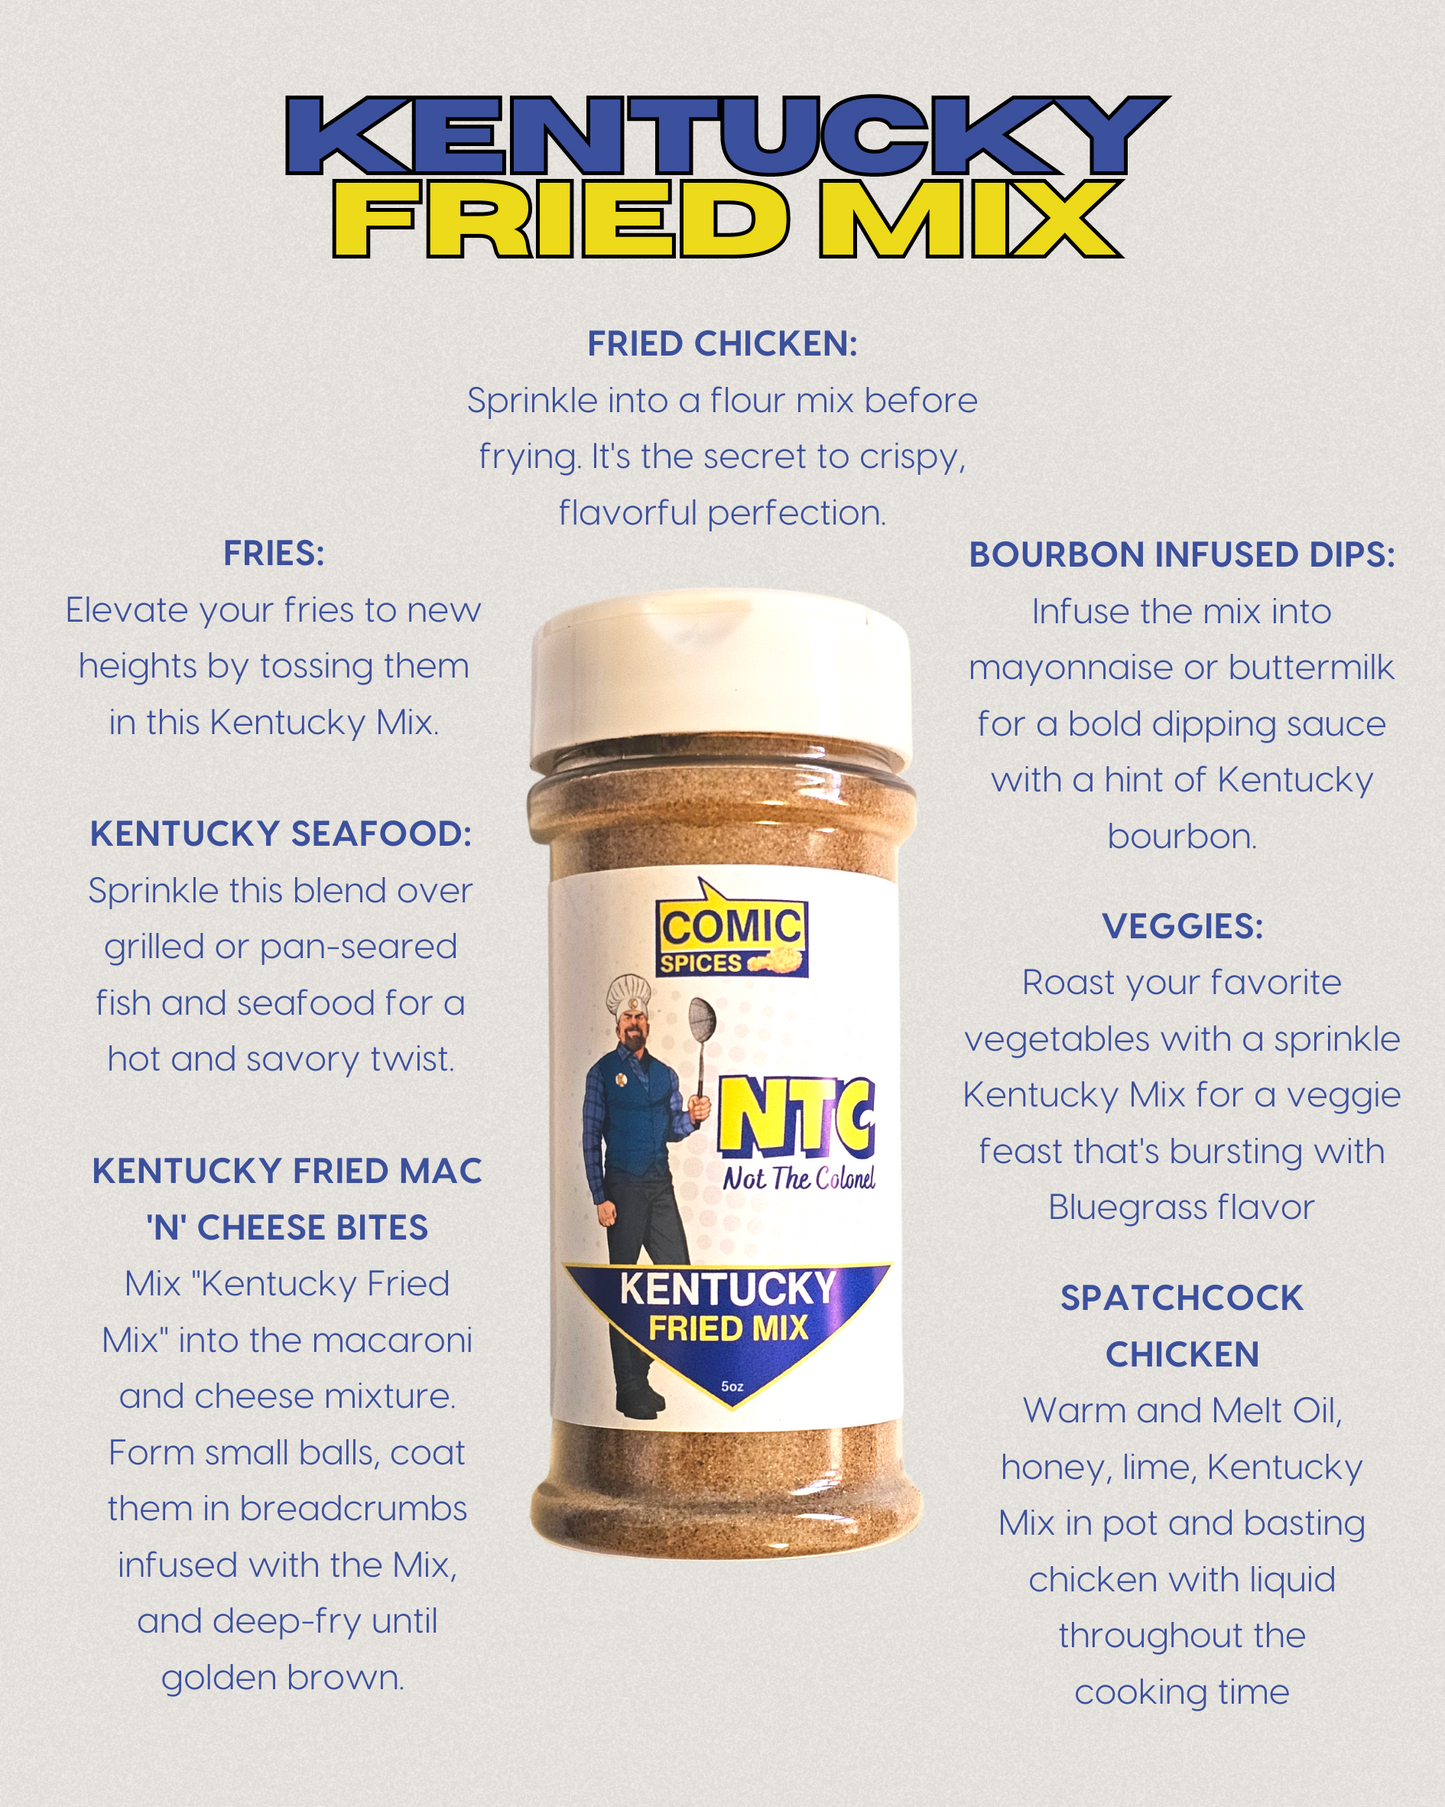 𝗞𝗲𝗻𝘁𝘂𝗰𝗸𝘆 𝗙𝗿𝗶𝗲𝗱 𝗠𝗶𝘅 - Chicken Seasoning Perfect for Fried, Grilled, or Roasted Chicken shrimp or veggies